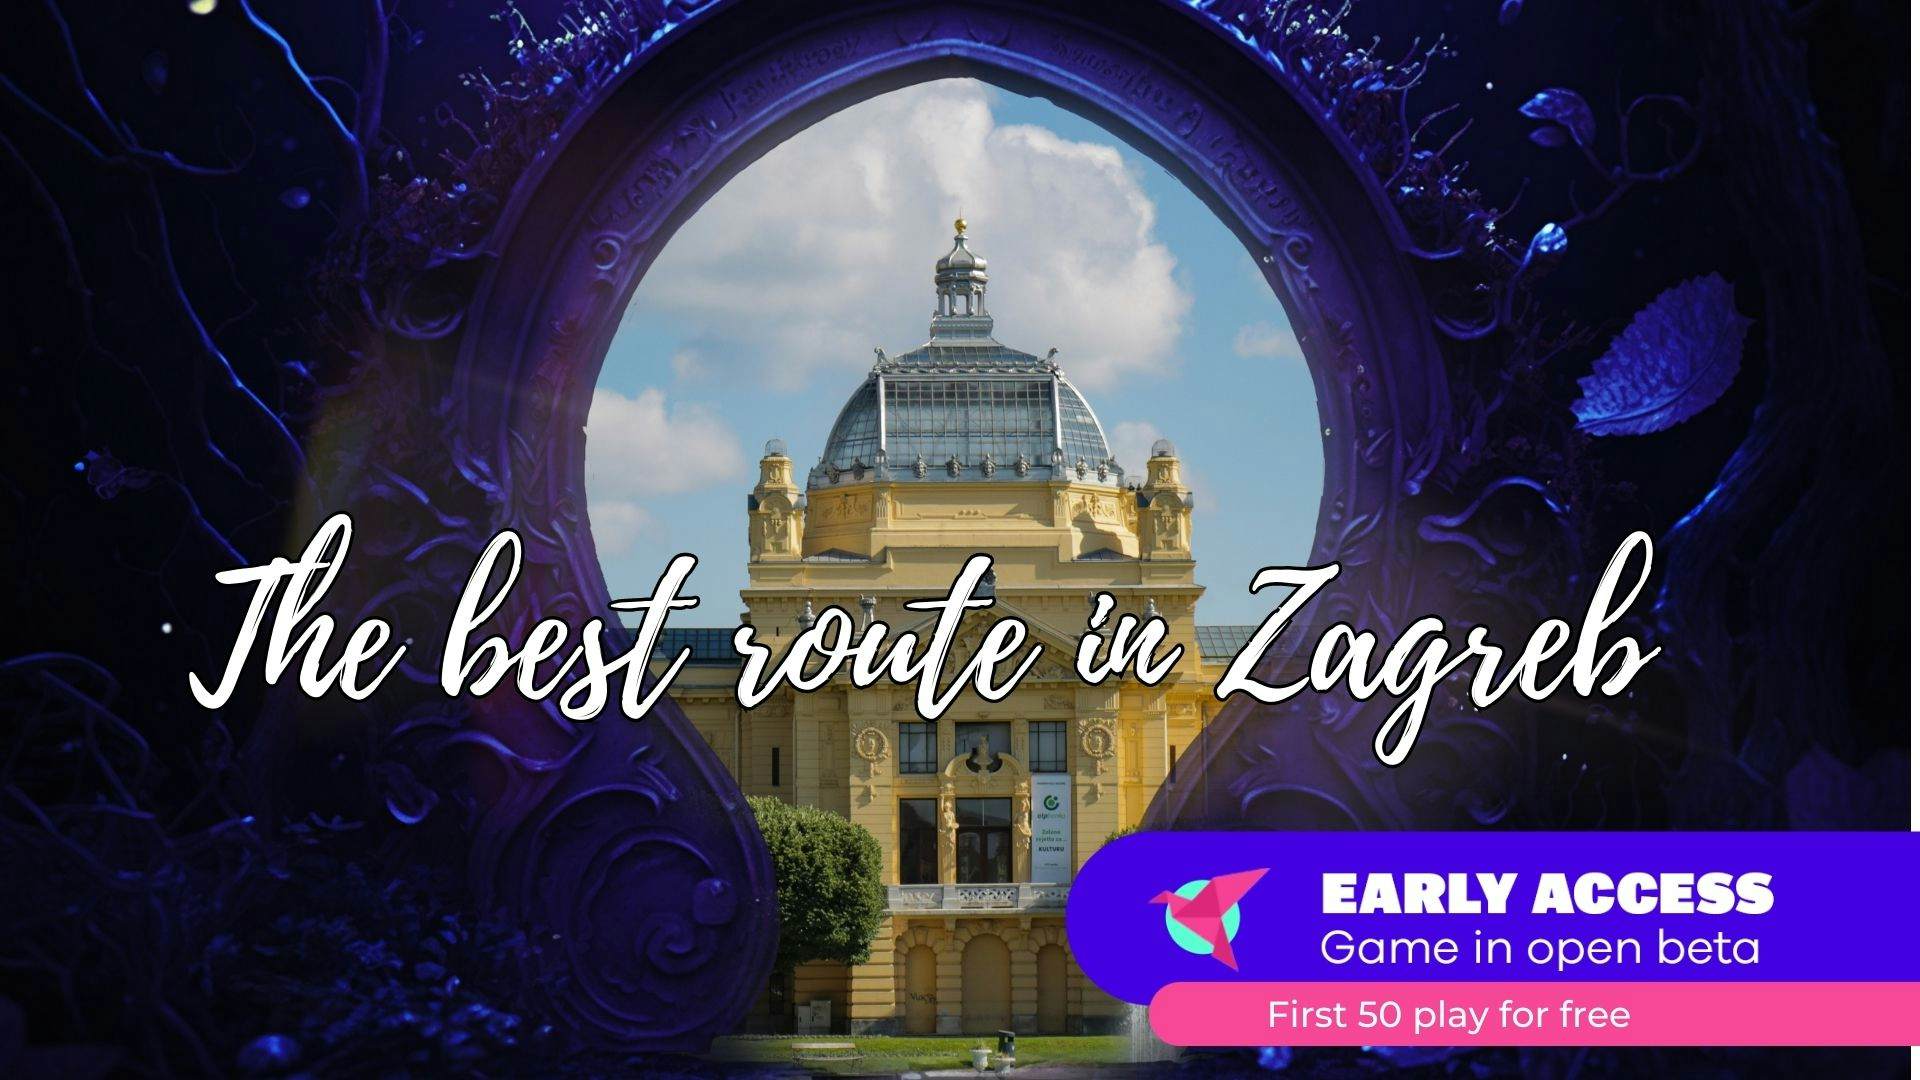 The best route in Zagreb image